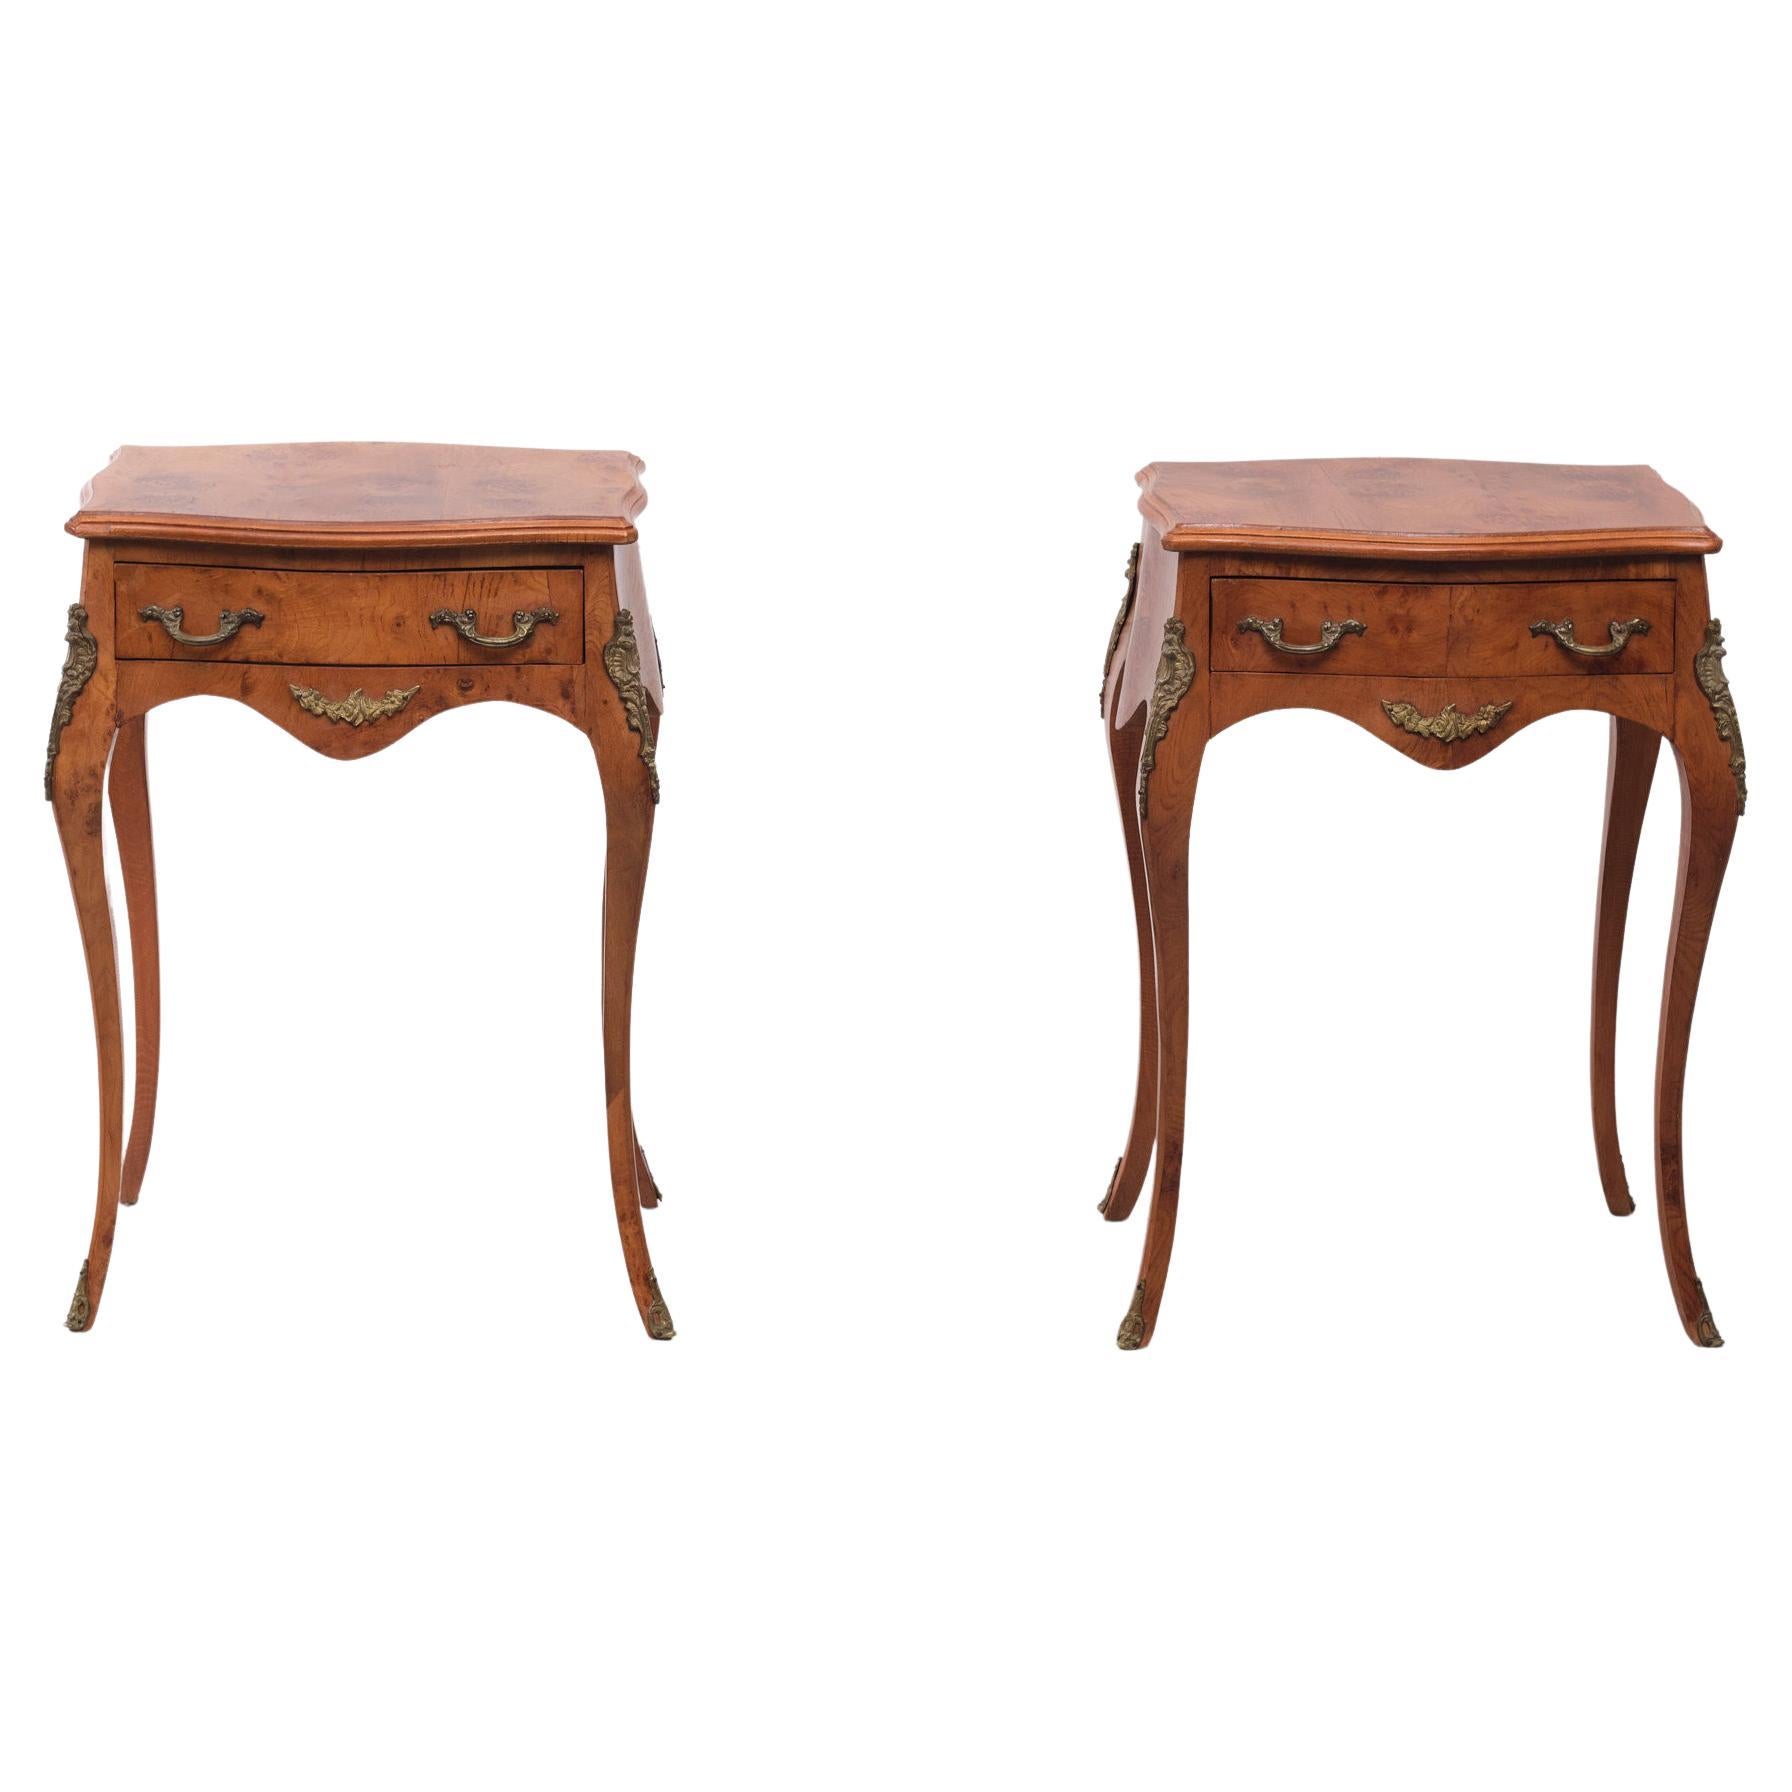 Very nice set of Italian side tables. Louis XV style. Burl wood bronze 
Handles and feet. looking great in any interior. attractive set.
Look at the measurements of this tables. pretty high on his feet.

